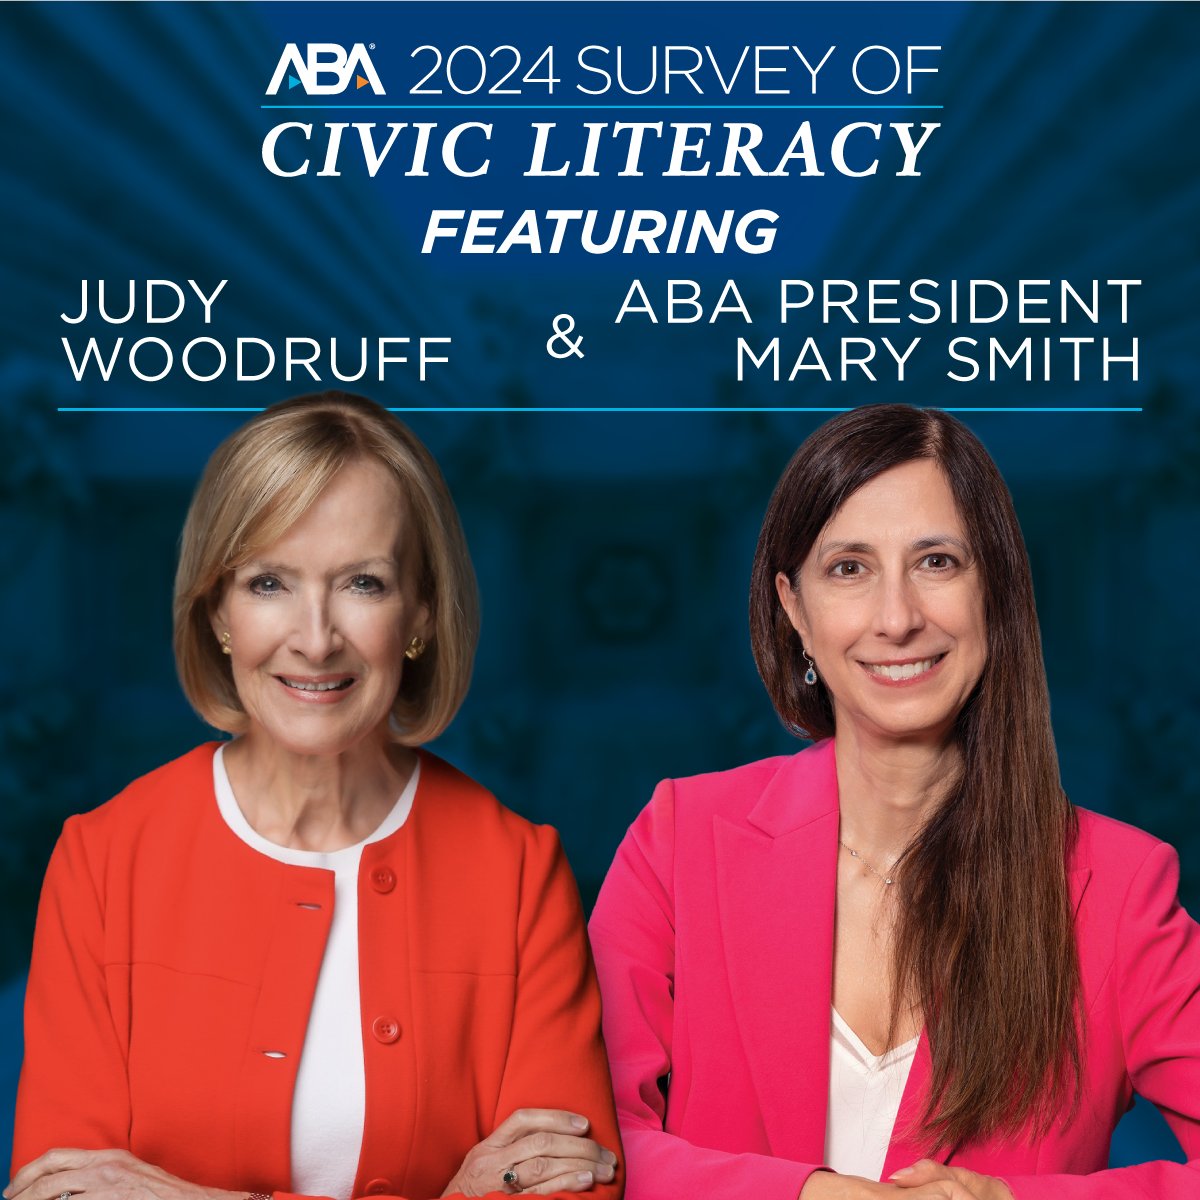 Join me and acclaimed broadcast journalist @JudyWoodruff and a distinguished panel of guests, including @judgeluttig on April 23 at 10 a.m. EDT for results from the sixth American Bar Association Survey of Civic Literacy: bit.ly/3IUuL5j #civicliteracy